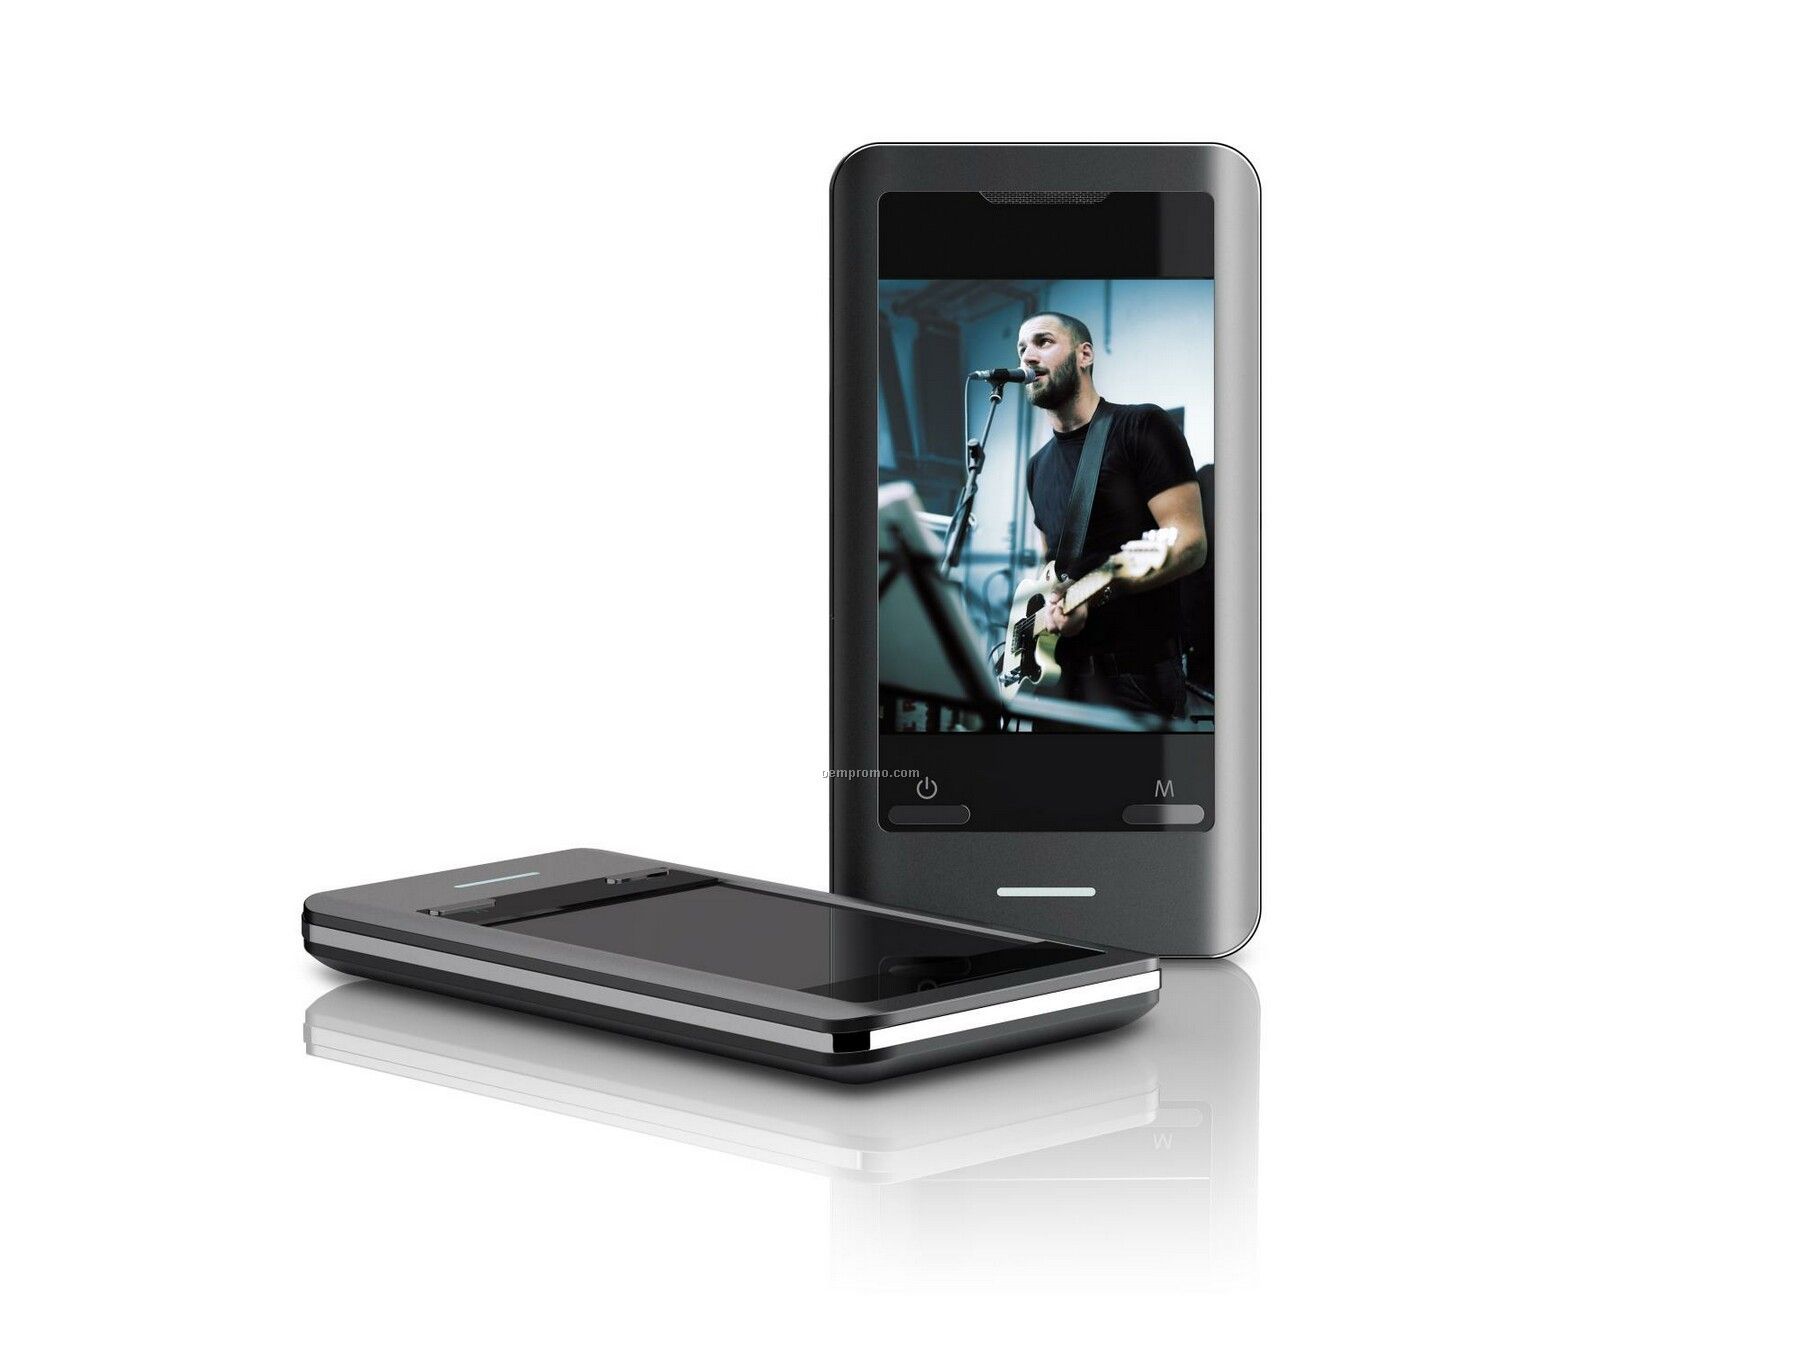 2.8" Touchscreen Video Mp3 Player With Speaker